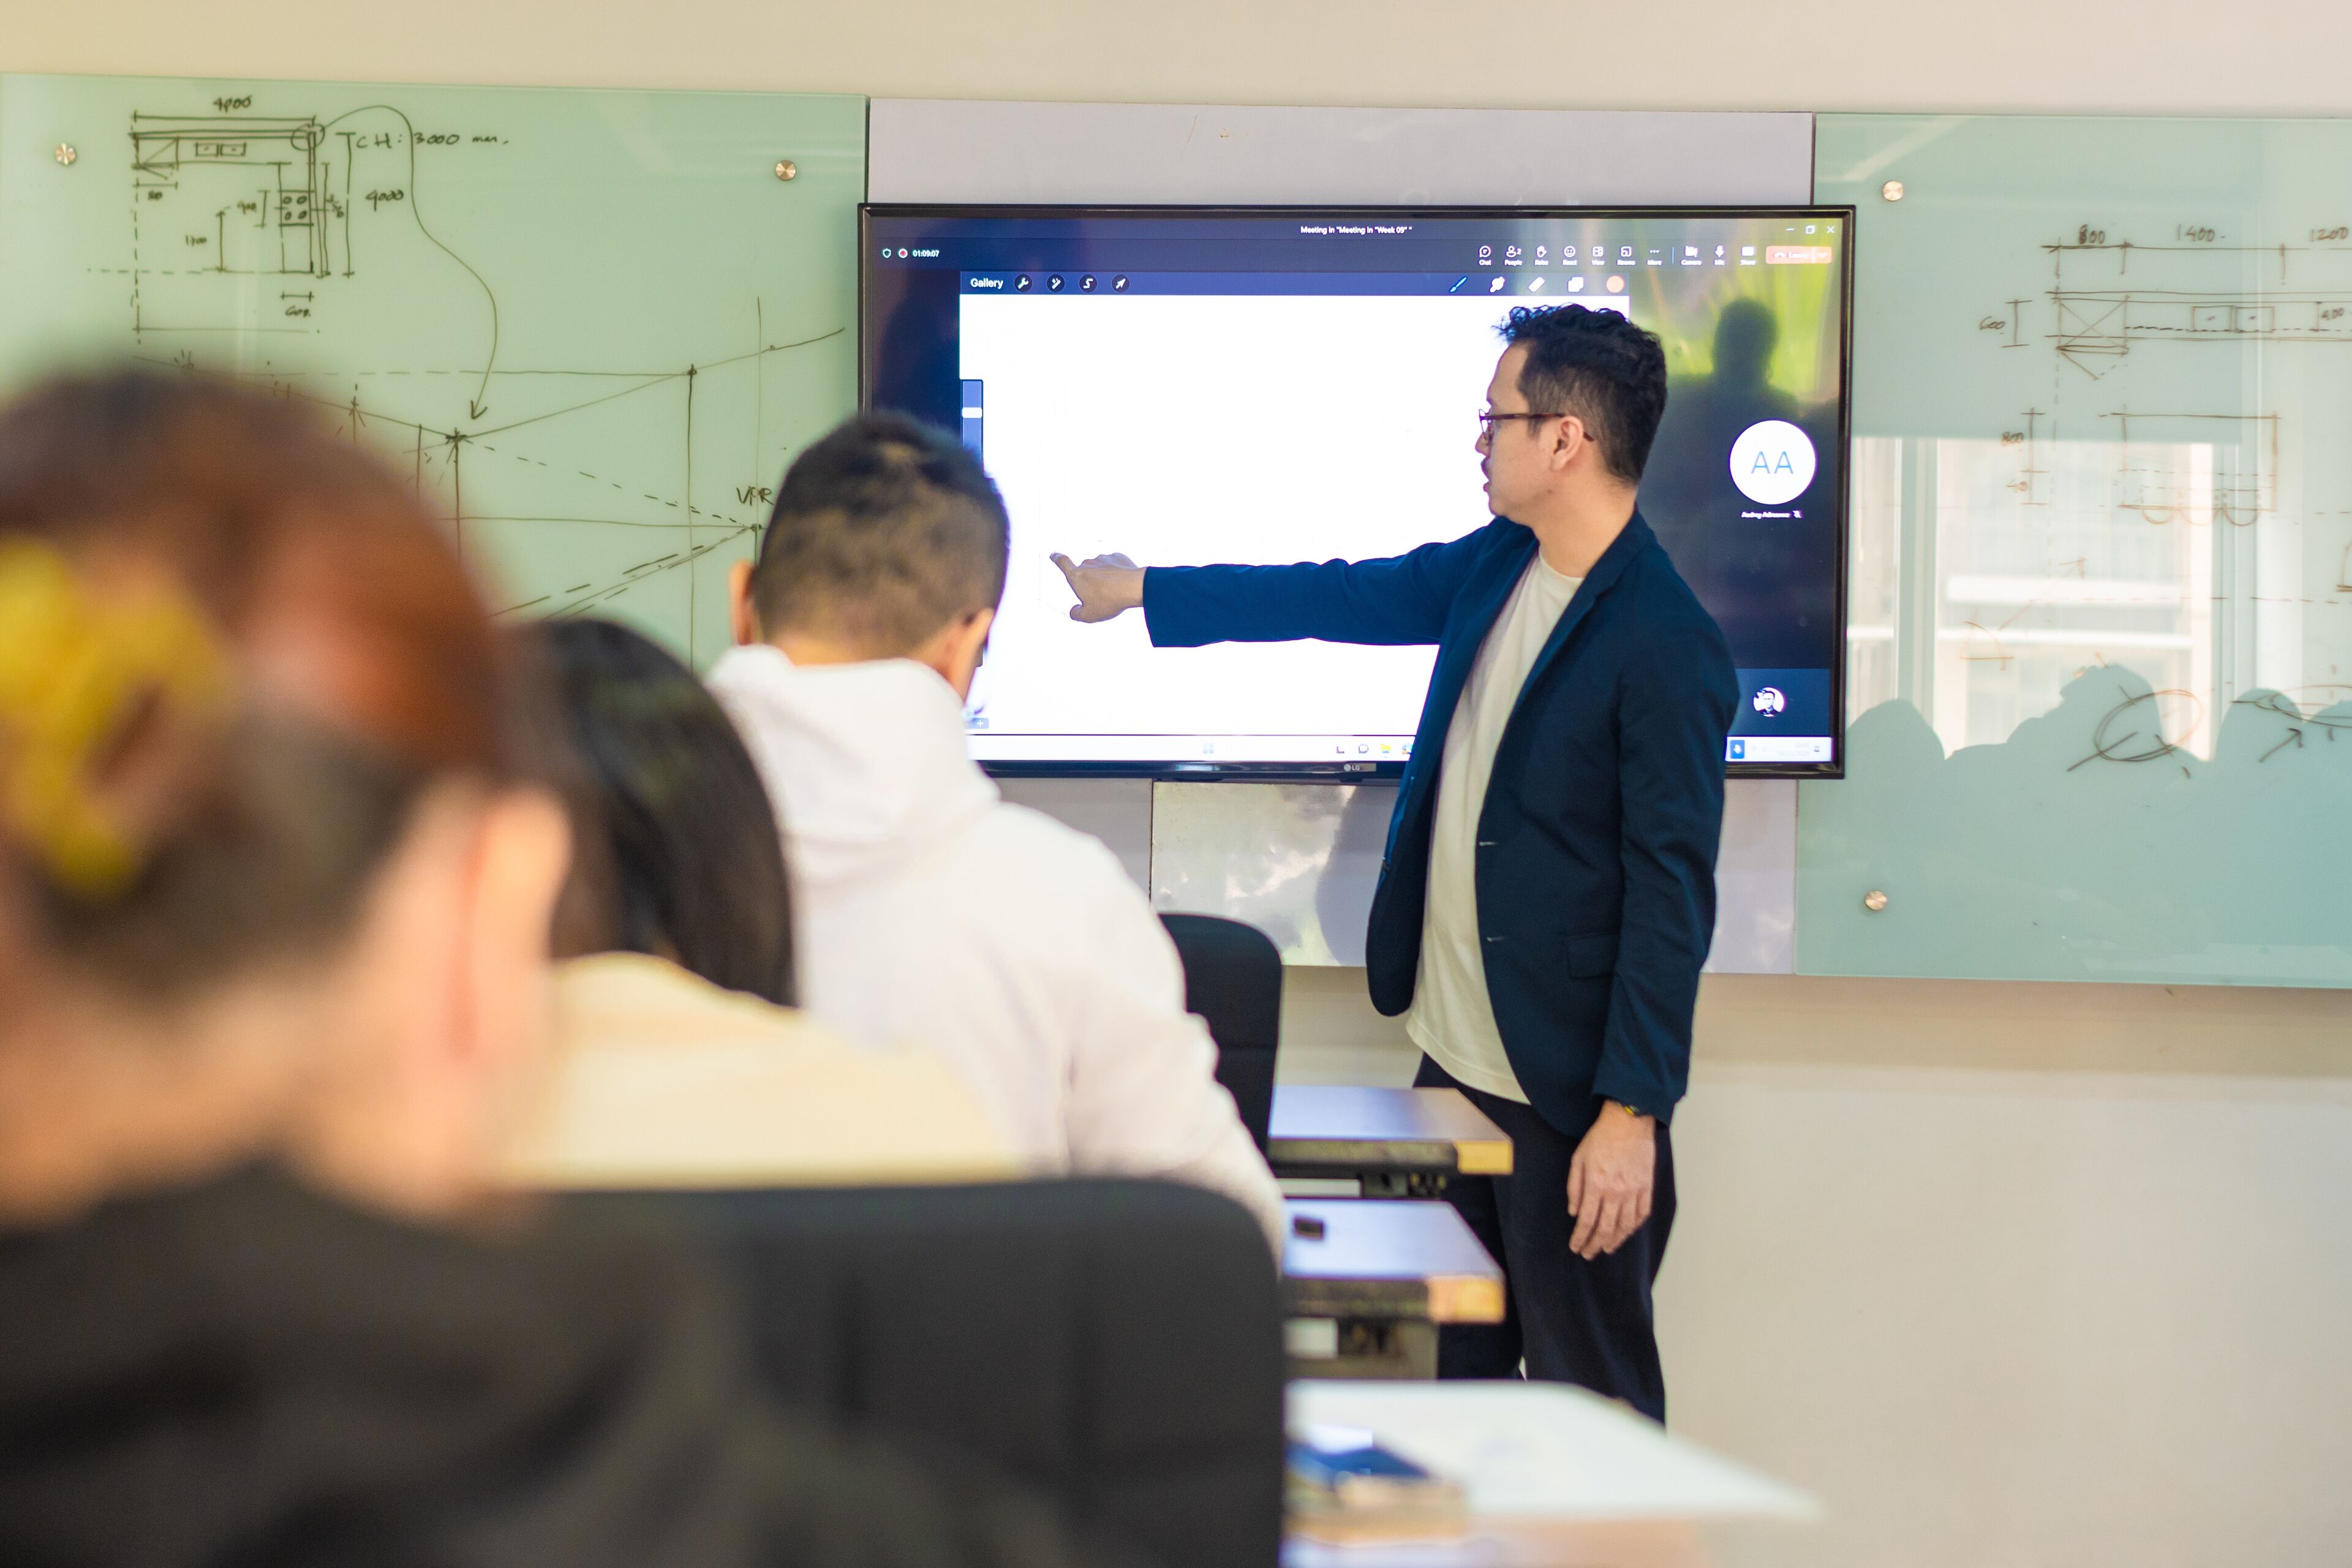 A lecturer pointing to a projection screen with technical drawings, in a classroom with attentive students.